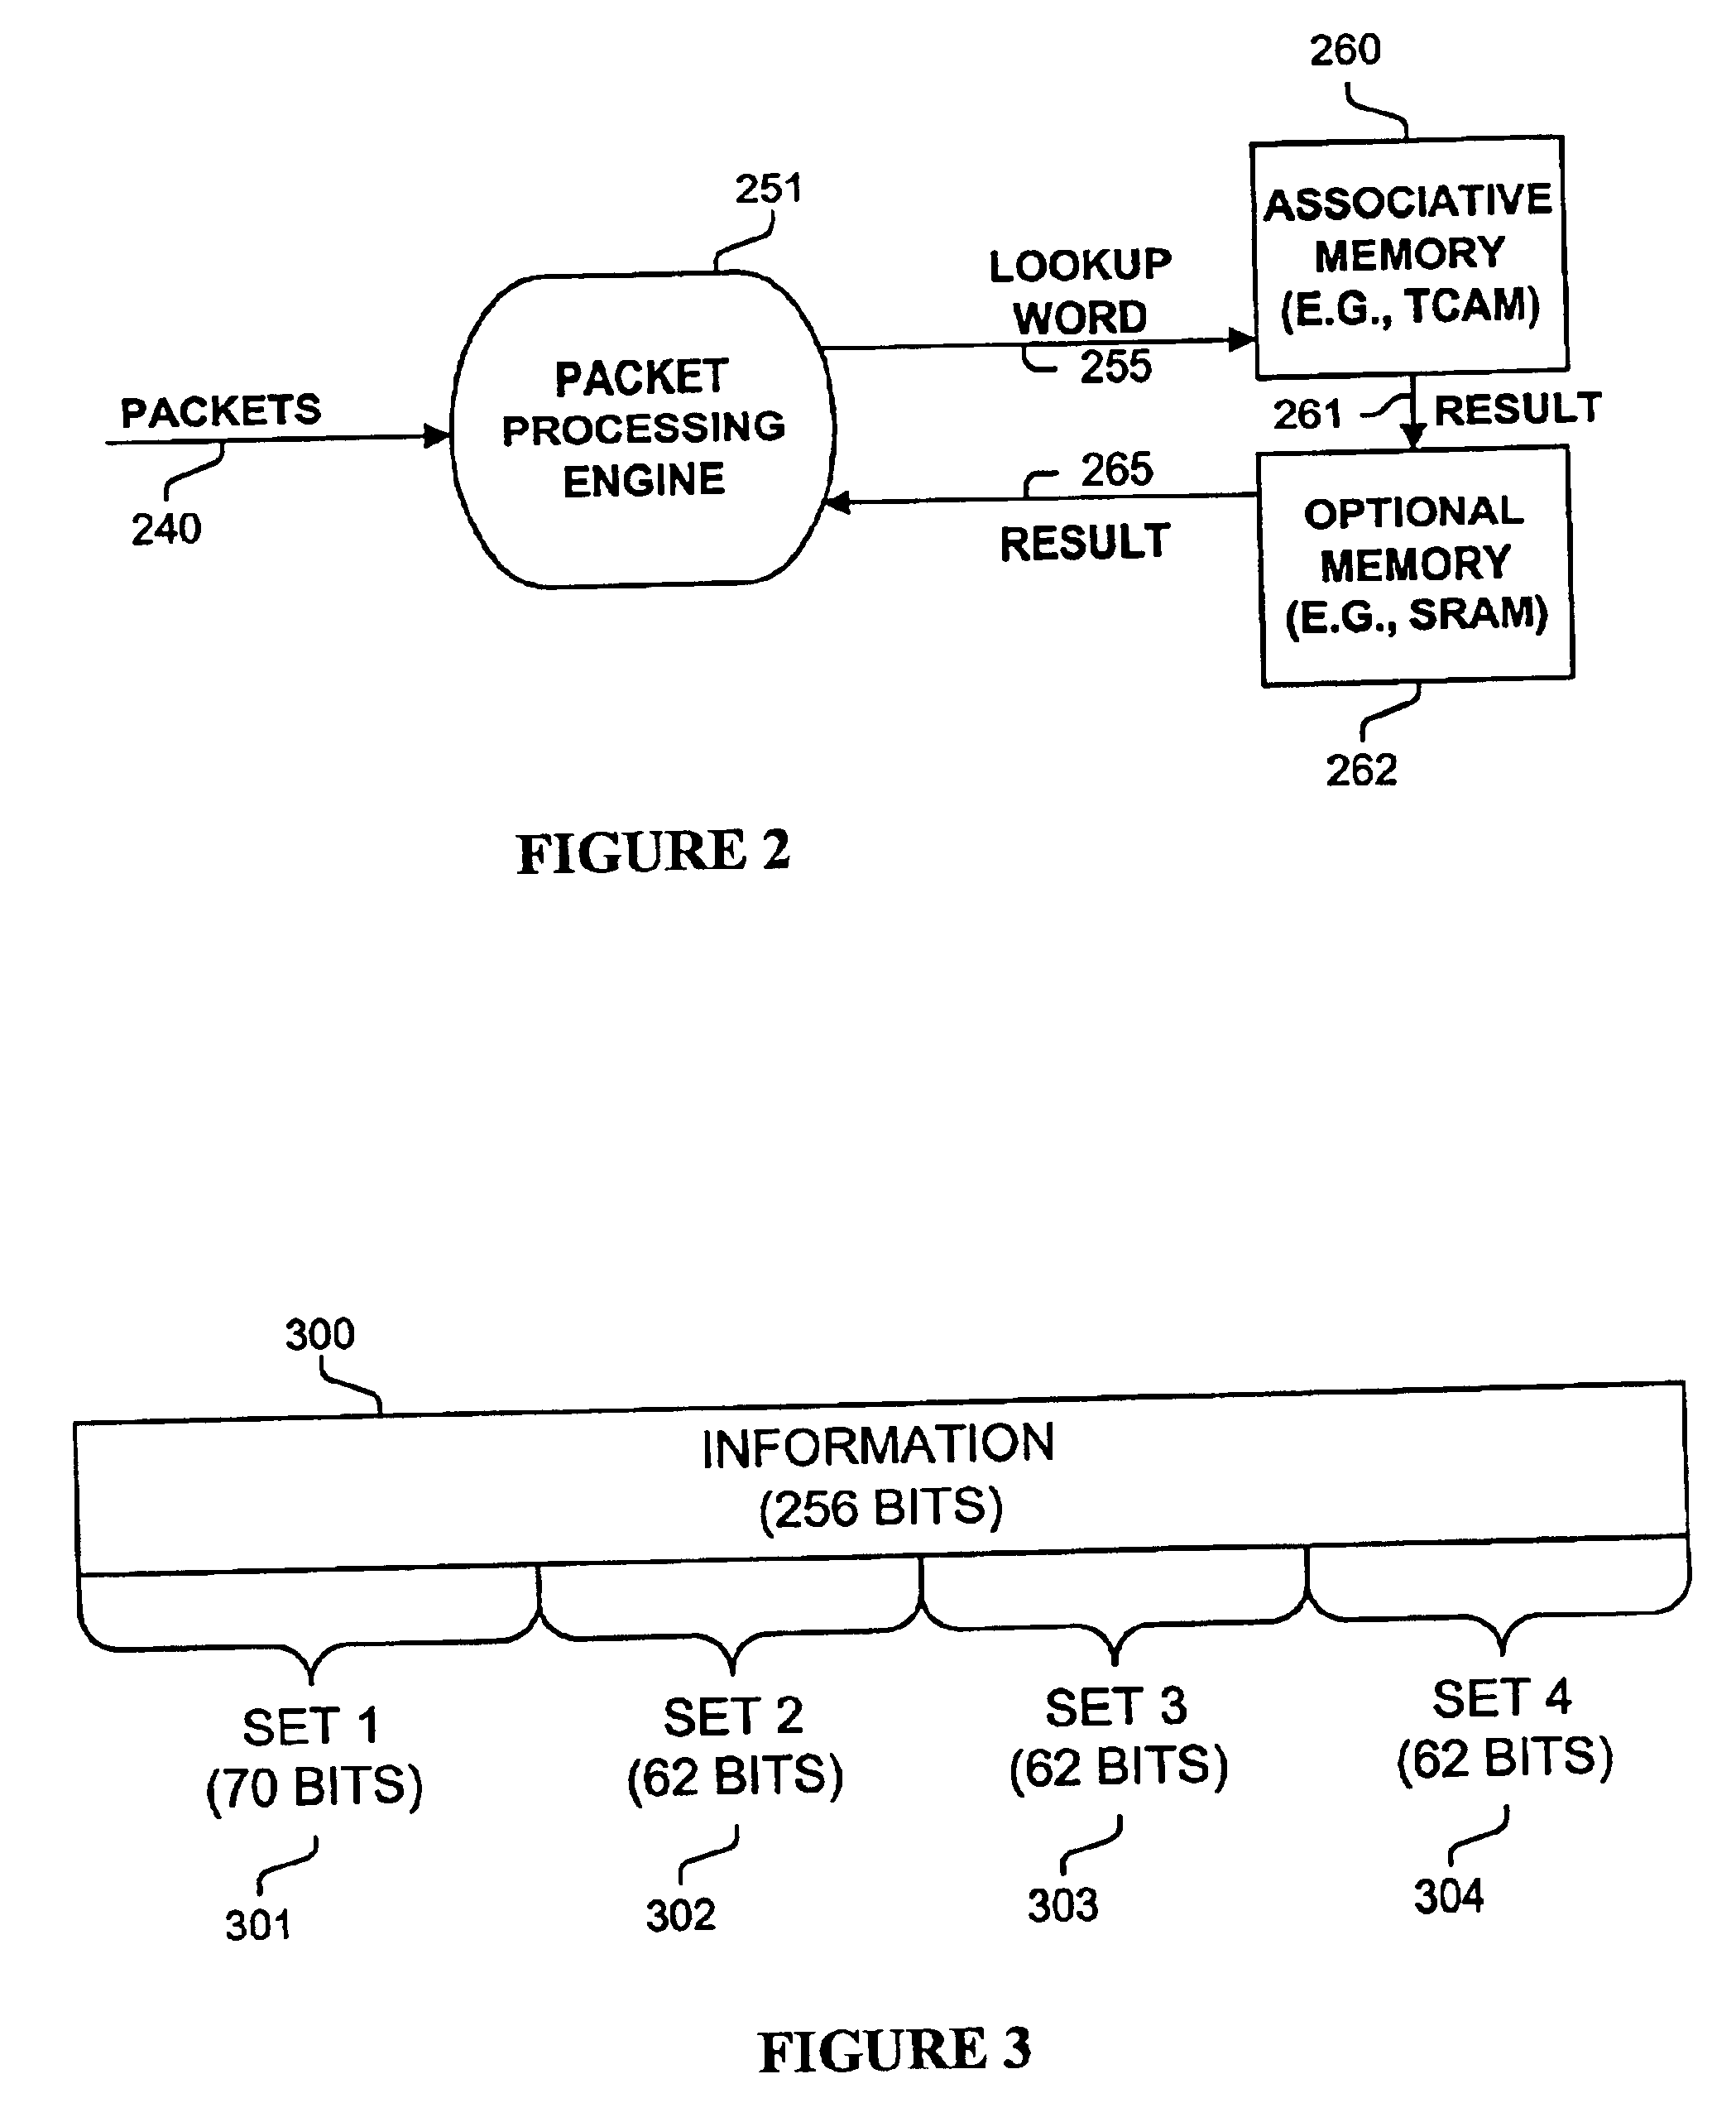 Method and apparatus for matching a string with multiple lookups using a single associative memory